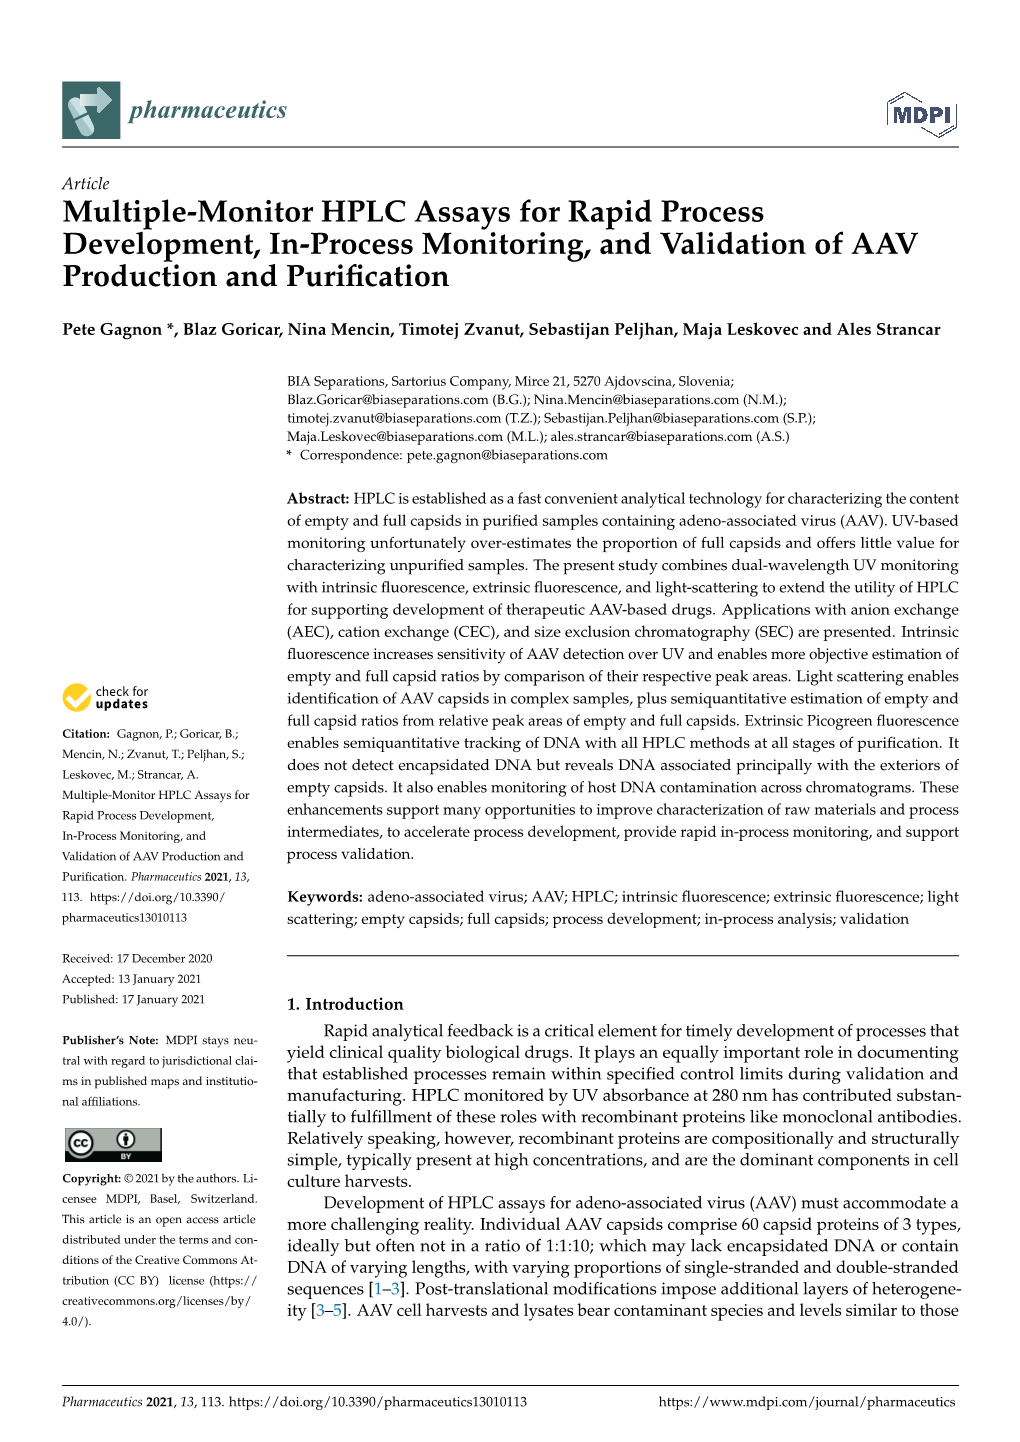 Multiple-Monitor HPLC Assays for Rapid Process Development, In-Process Monitoring, and Validation of AAV Production and Puriﬁcation